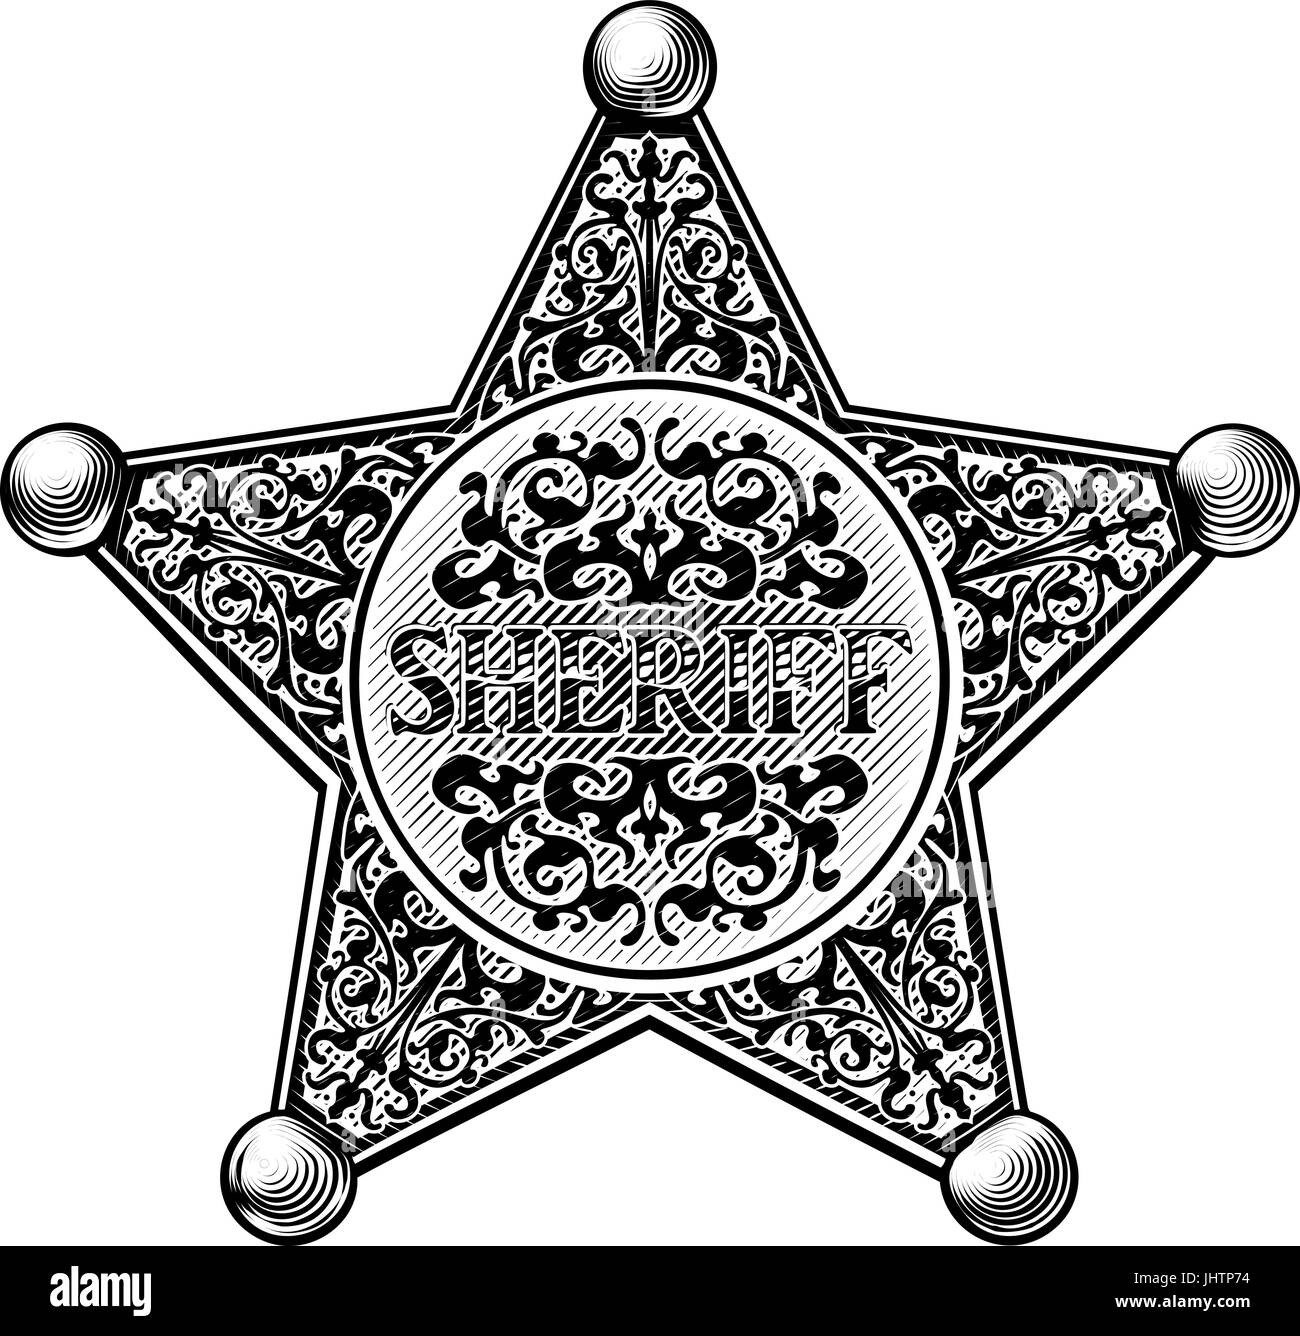 Sheriff Star Badge Engraved Style Stock Vector